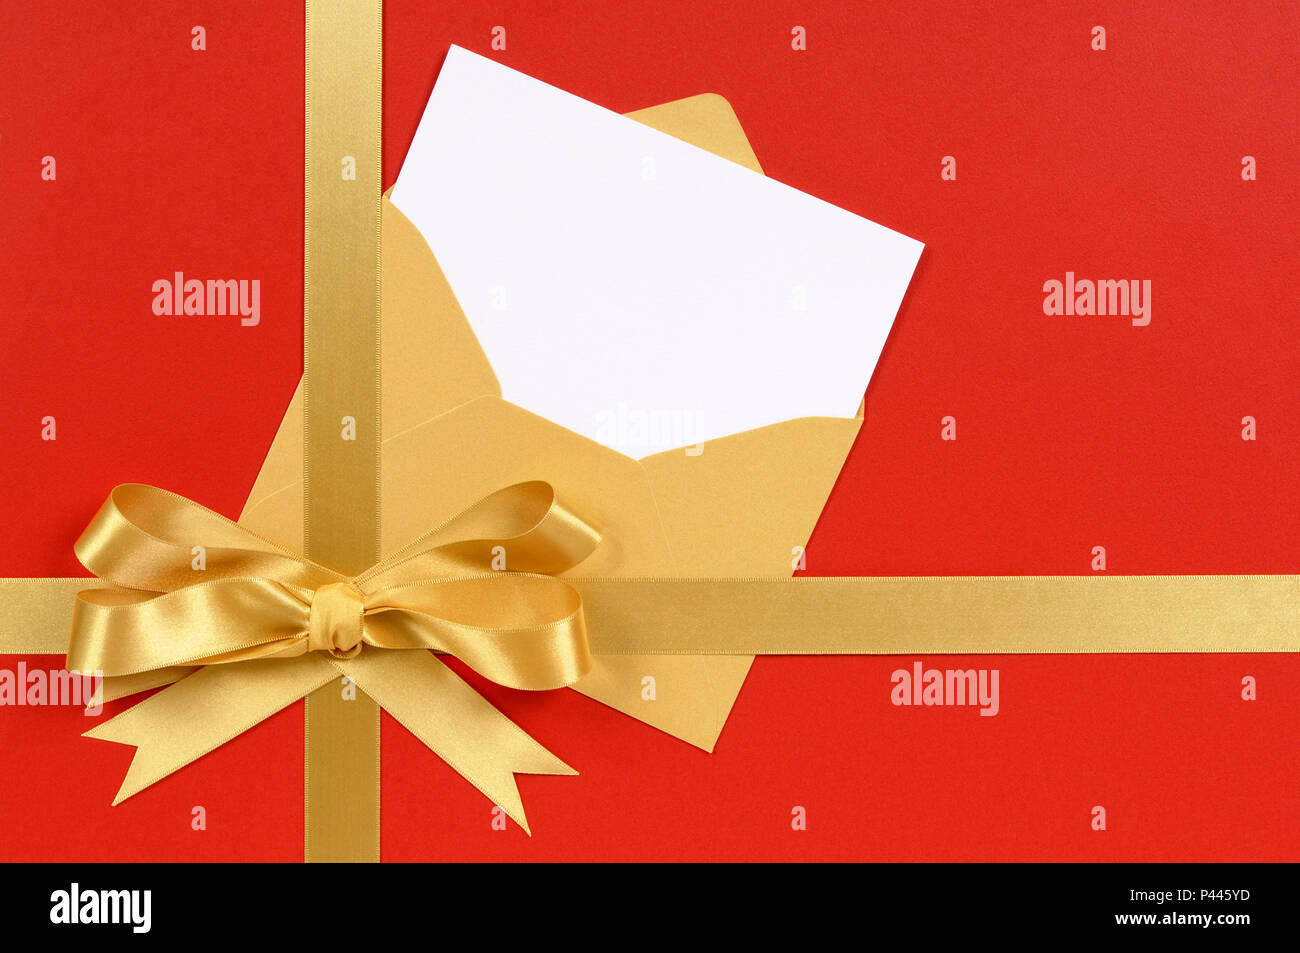 Red and gold Christmas gift with blank invitation or greetings card. Stock Photo